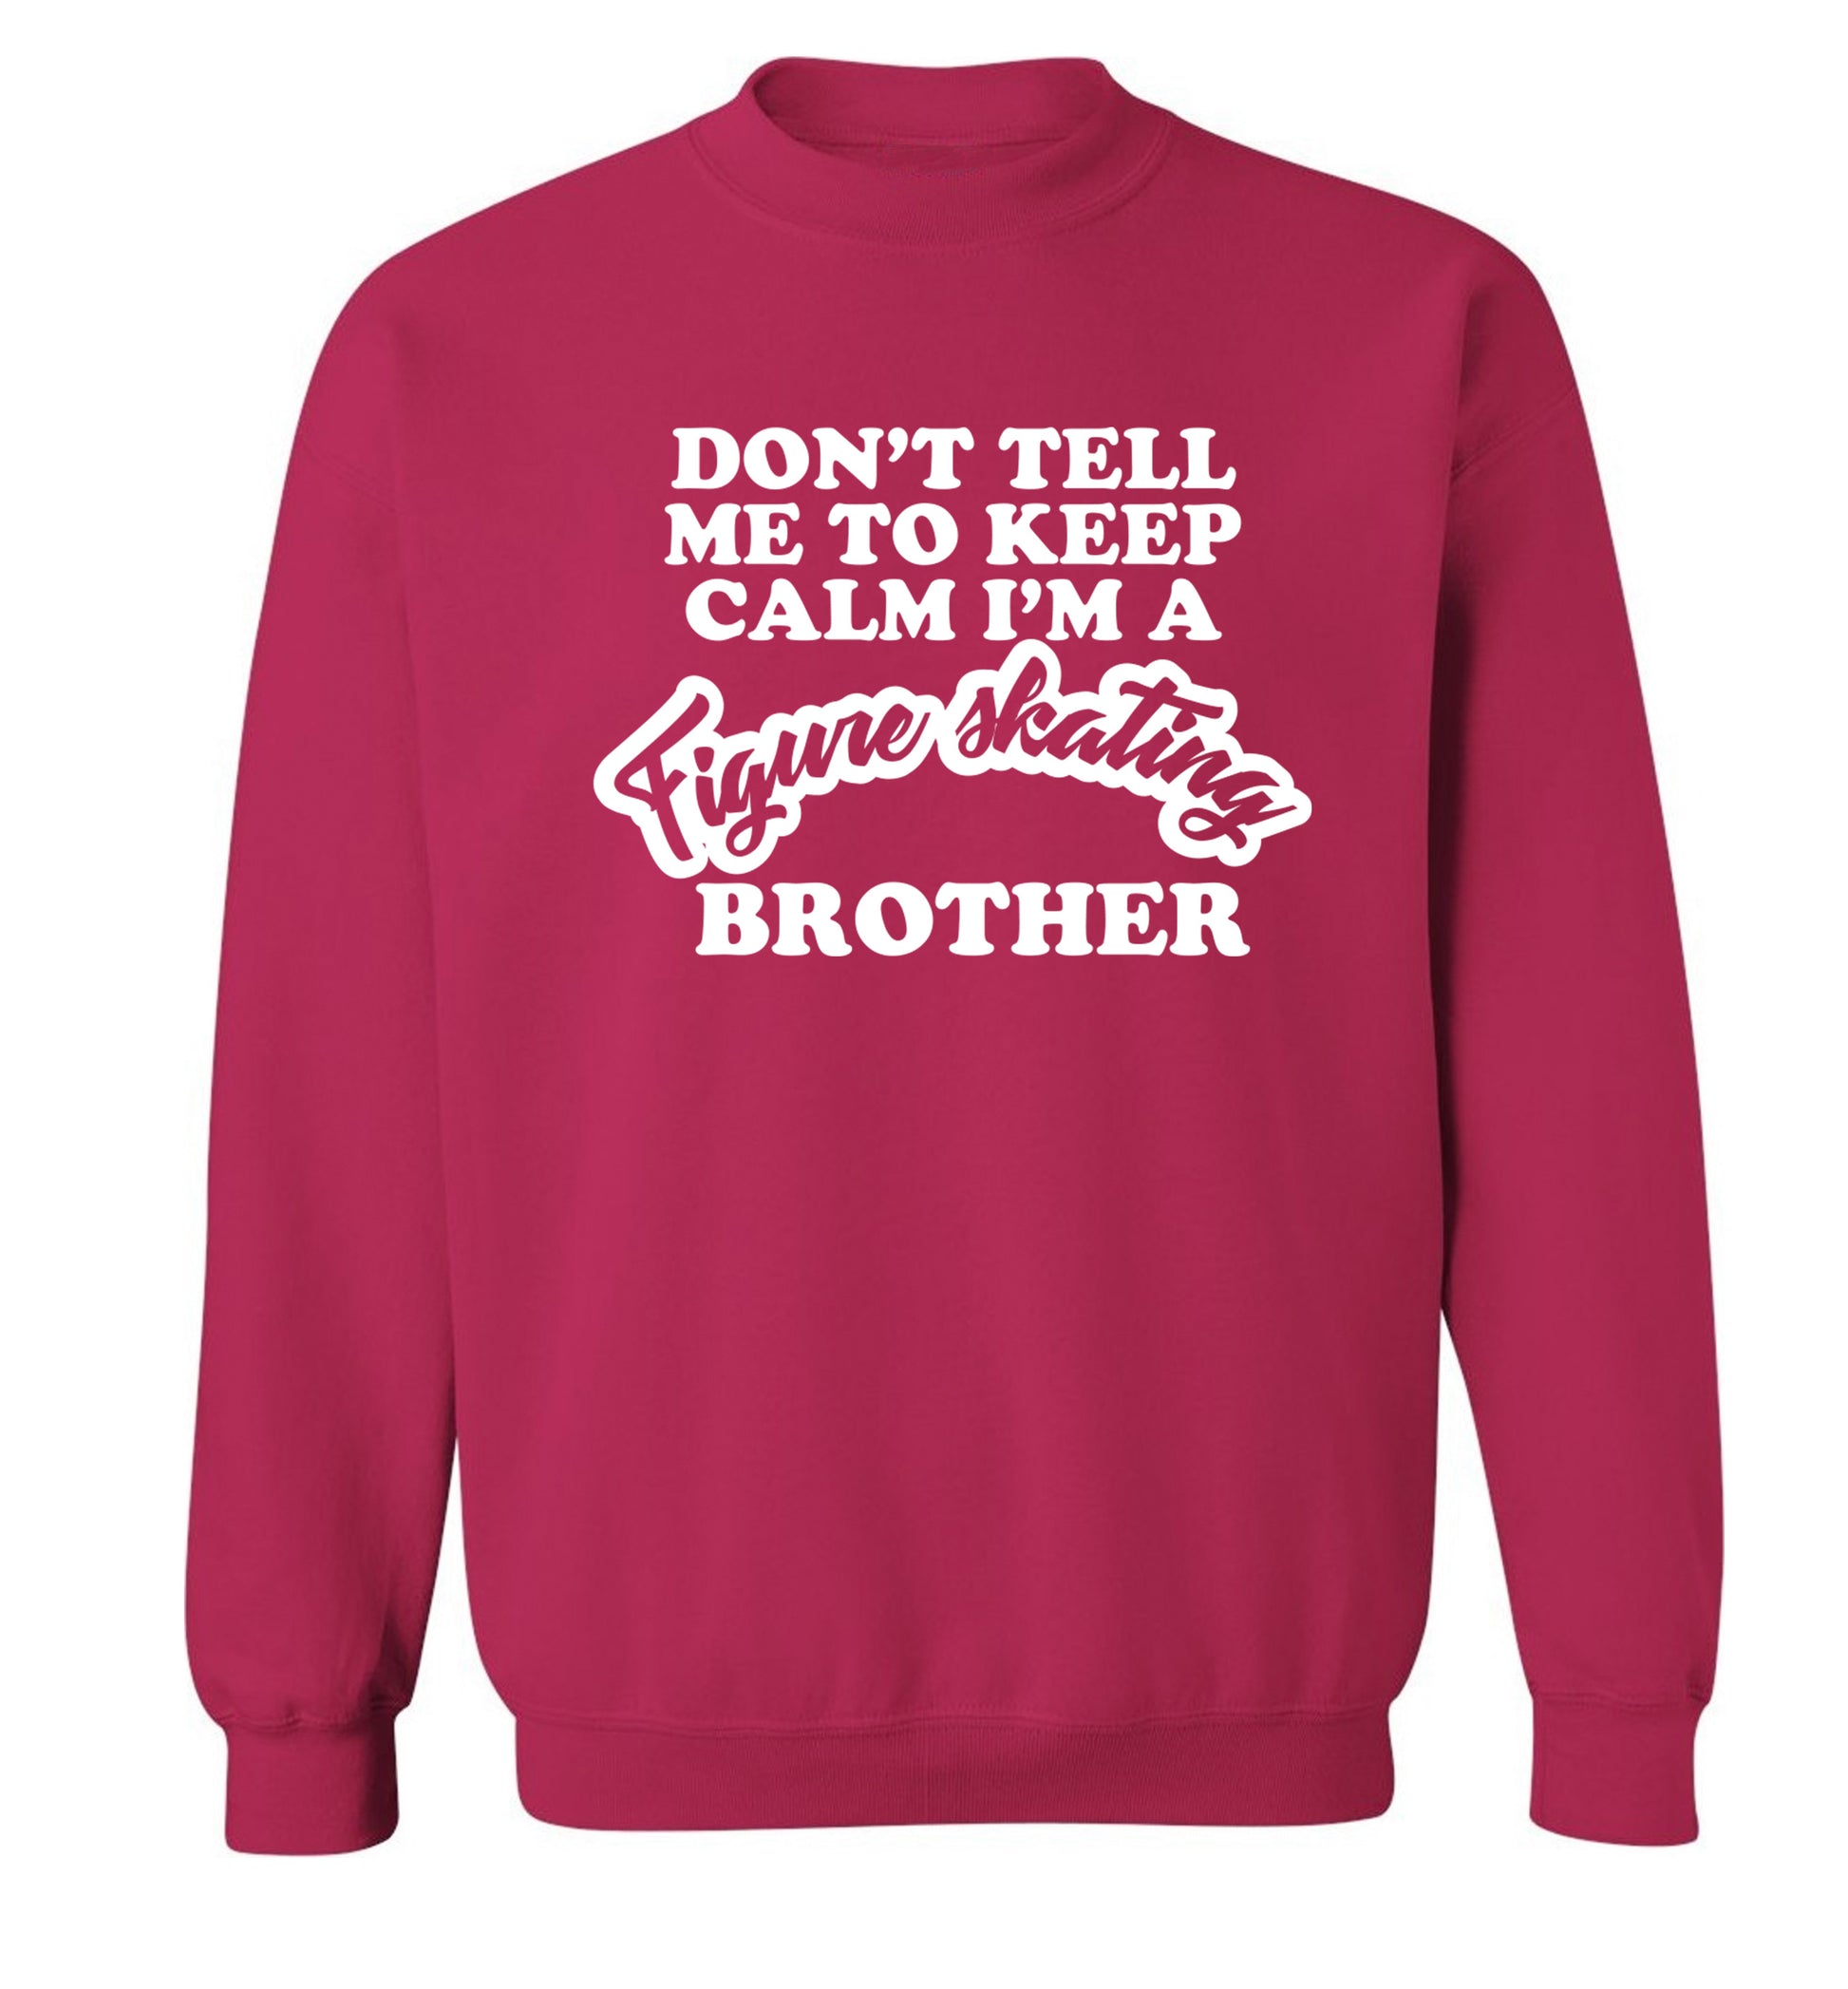 Don't tell me to keep calm I'm a figure skating brother Adult's unisexpink Sweater 2XL